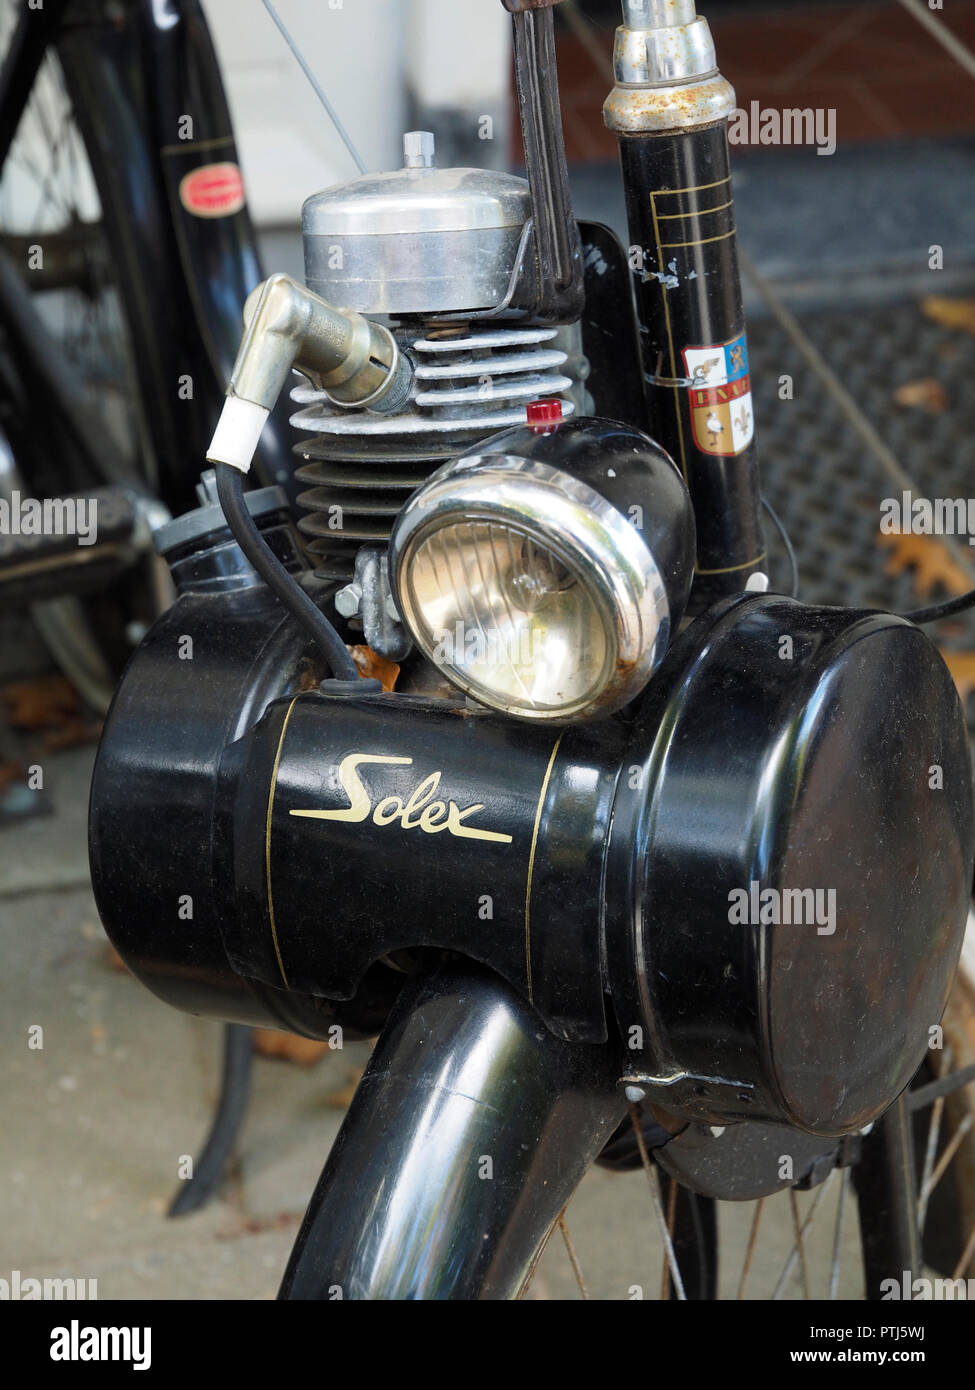 Closeup of classic Solex moped motorized bicycle engine on top of the front wheel Stock Photo